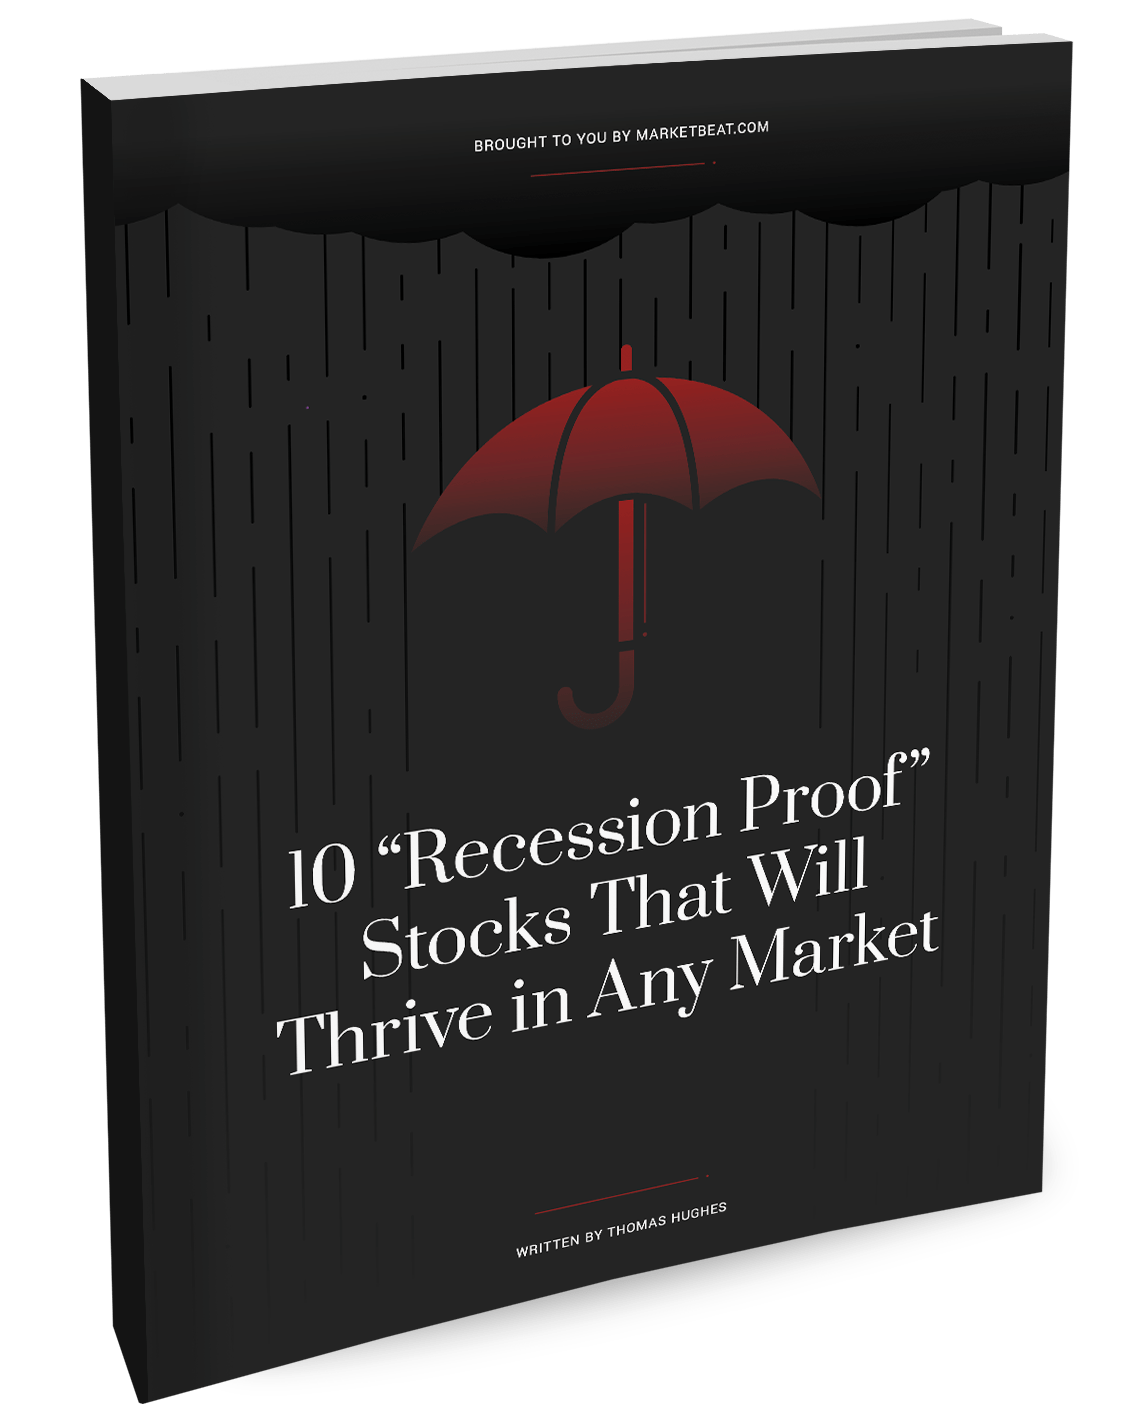 Ten "recession-proof" Stocks that grow with any market coverage